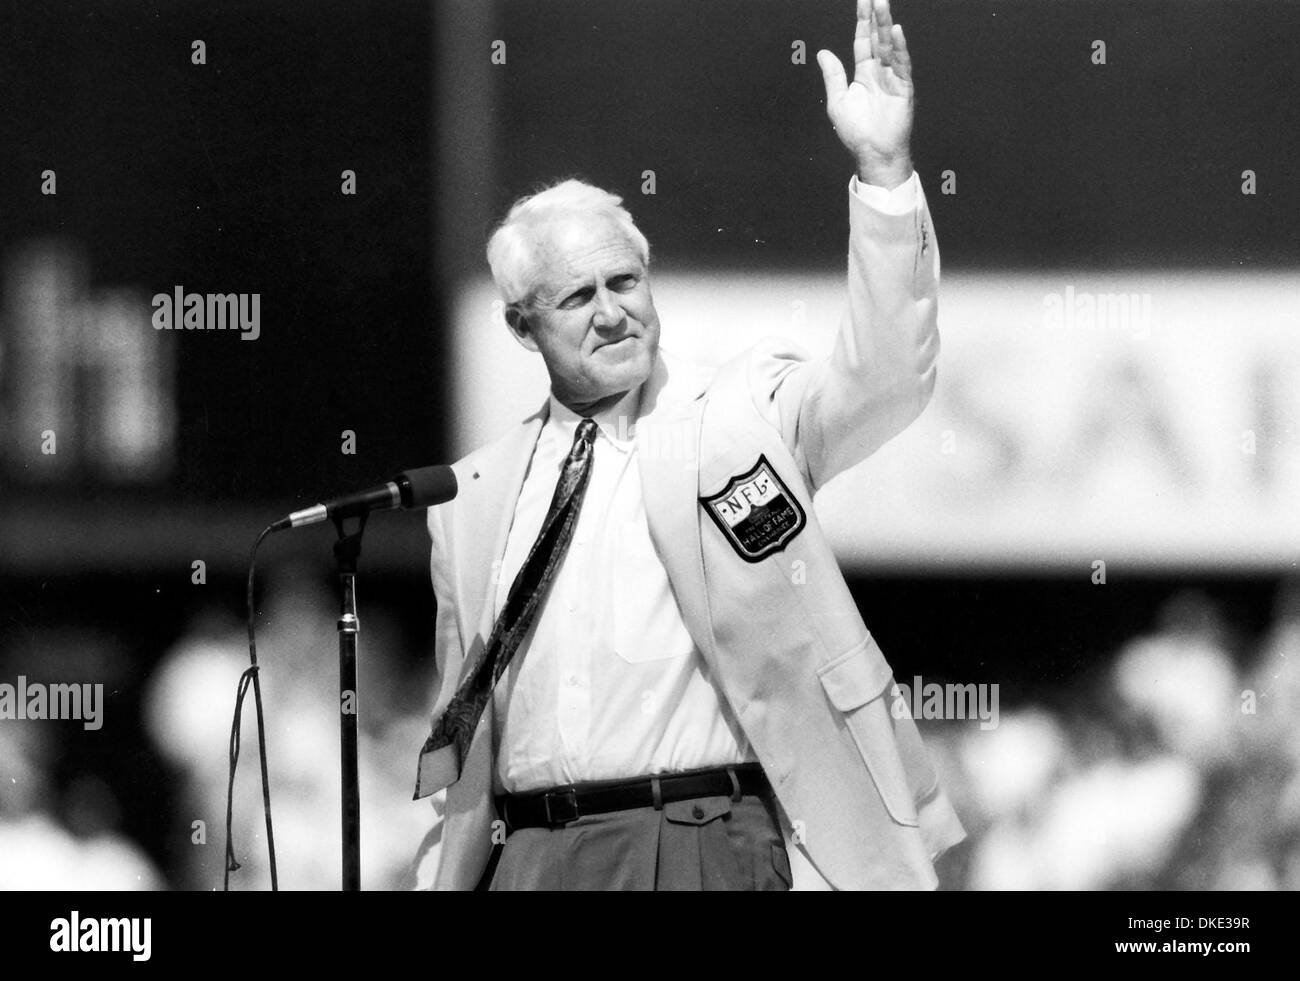 WILLIAM ERNEST WALSH (November 30, 1931 – July 30, 2007), one of the greatest football coaches of all time. Bill Walsh, the inventor of the West Coast Offense, died at the age of 75, following a long battle with leukemia. Walsh, guided the San Francisco 49ers to three Super Bowl championships and six NFC West division titles in his 10 years as head coach. Walsh didn't become an NFL Stock Photo